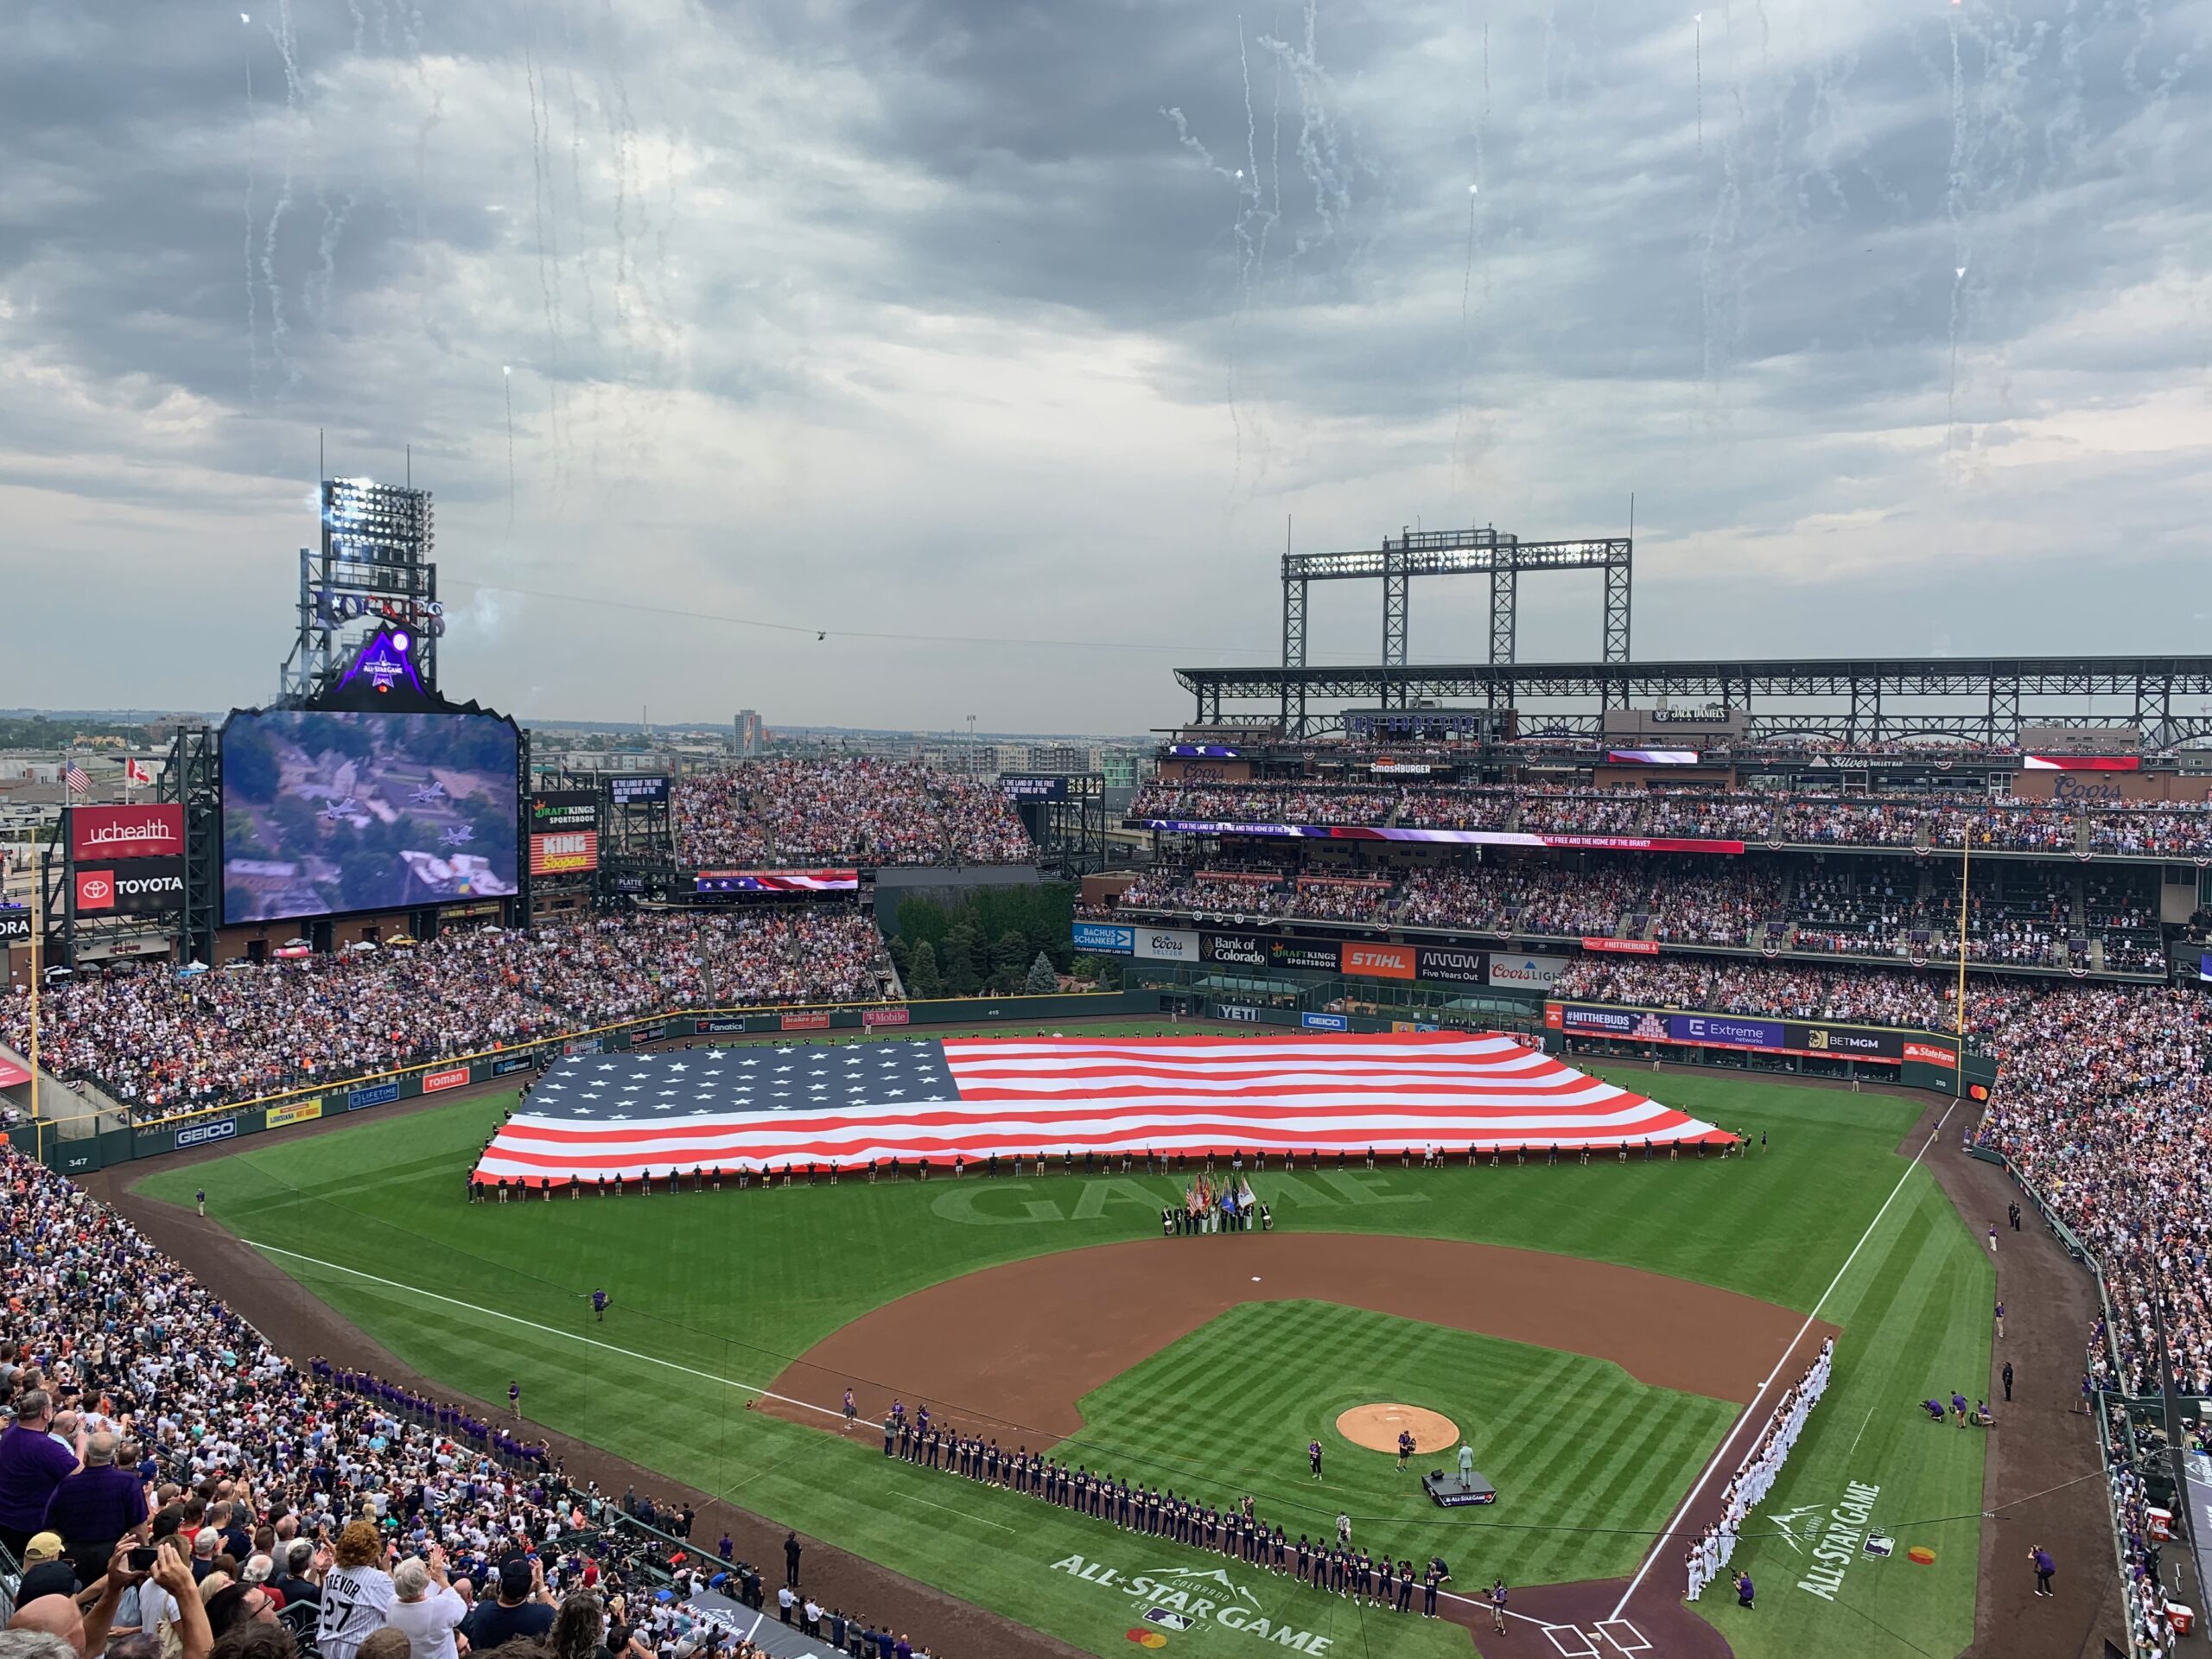 Colorado Rockies: Is the All Star Game coming to Coors Field?